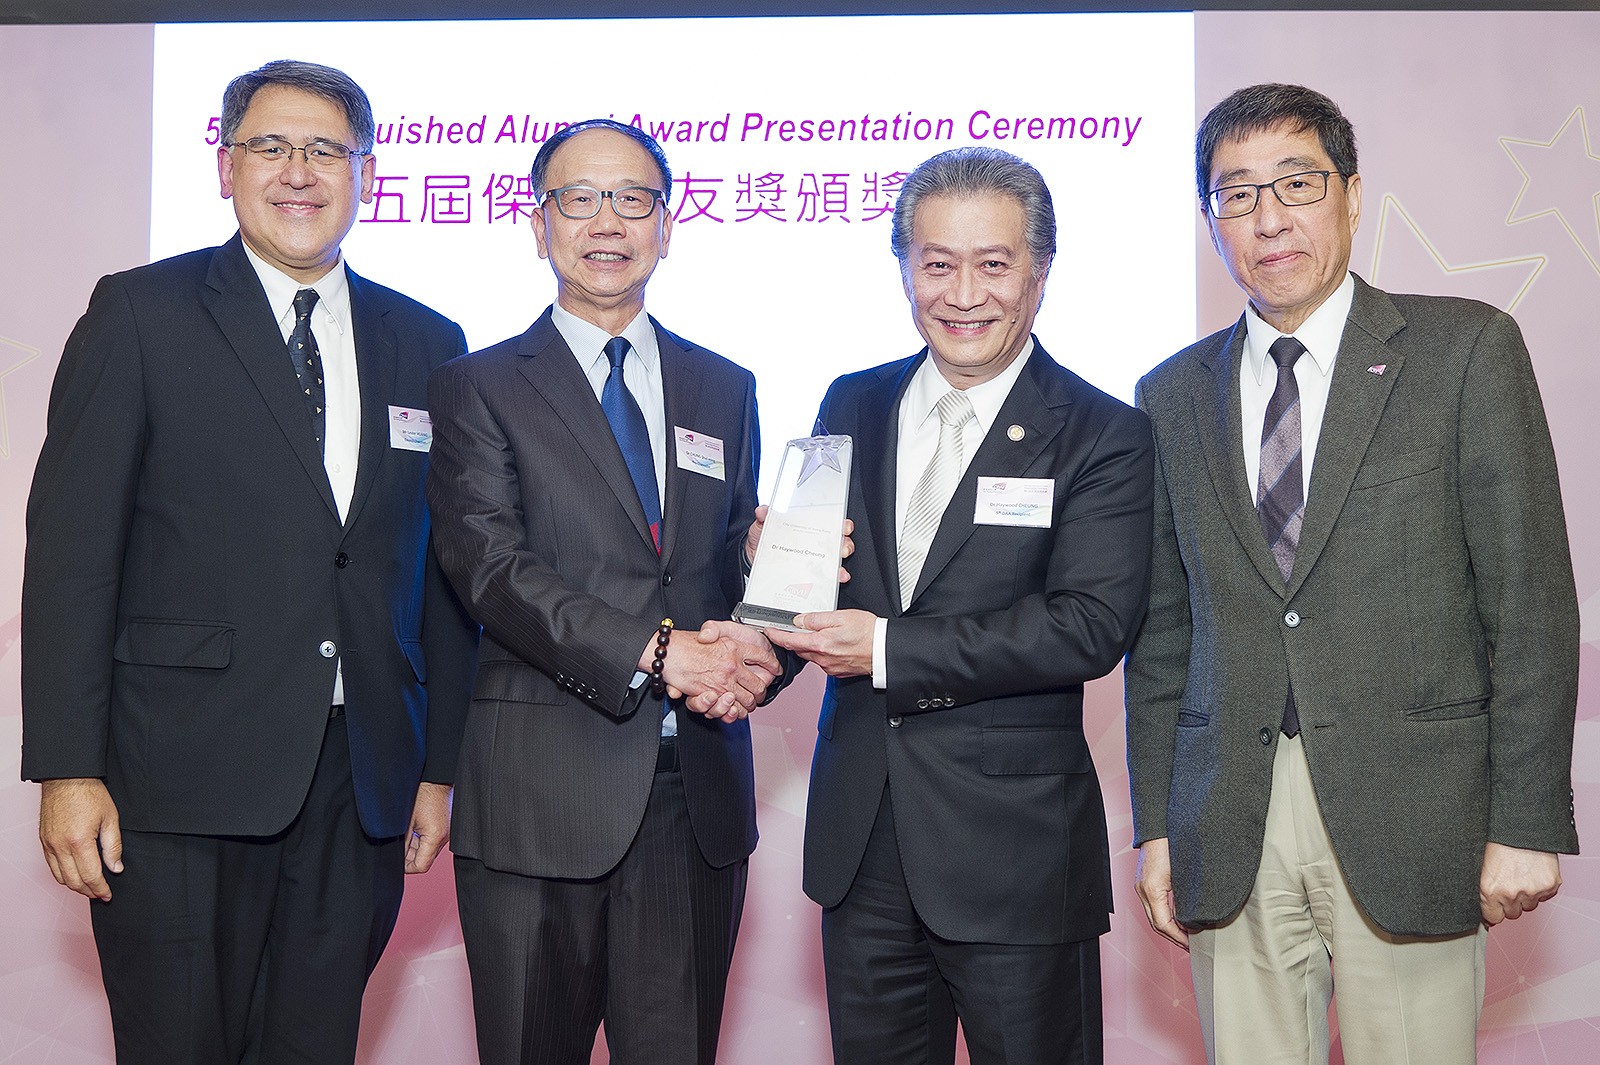 Dr Haywood Cheung (second from right) is conferred the 5th Distinguished Alumni Award of CityU. The ceremony was officiated by Dr Chung Shui-ming, CityU Pro-Chancellor (second from left), Mr Lester Garson Huang, CityU Council Chairman (far left), and Professor Way Kuo, CityU President (far right). 